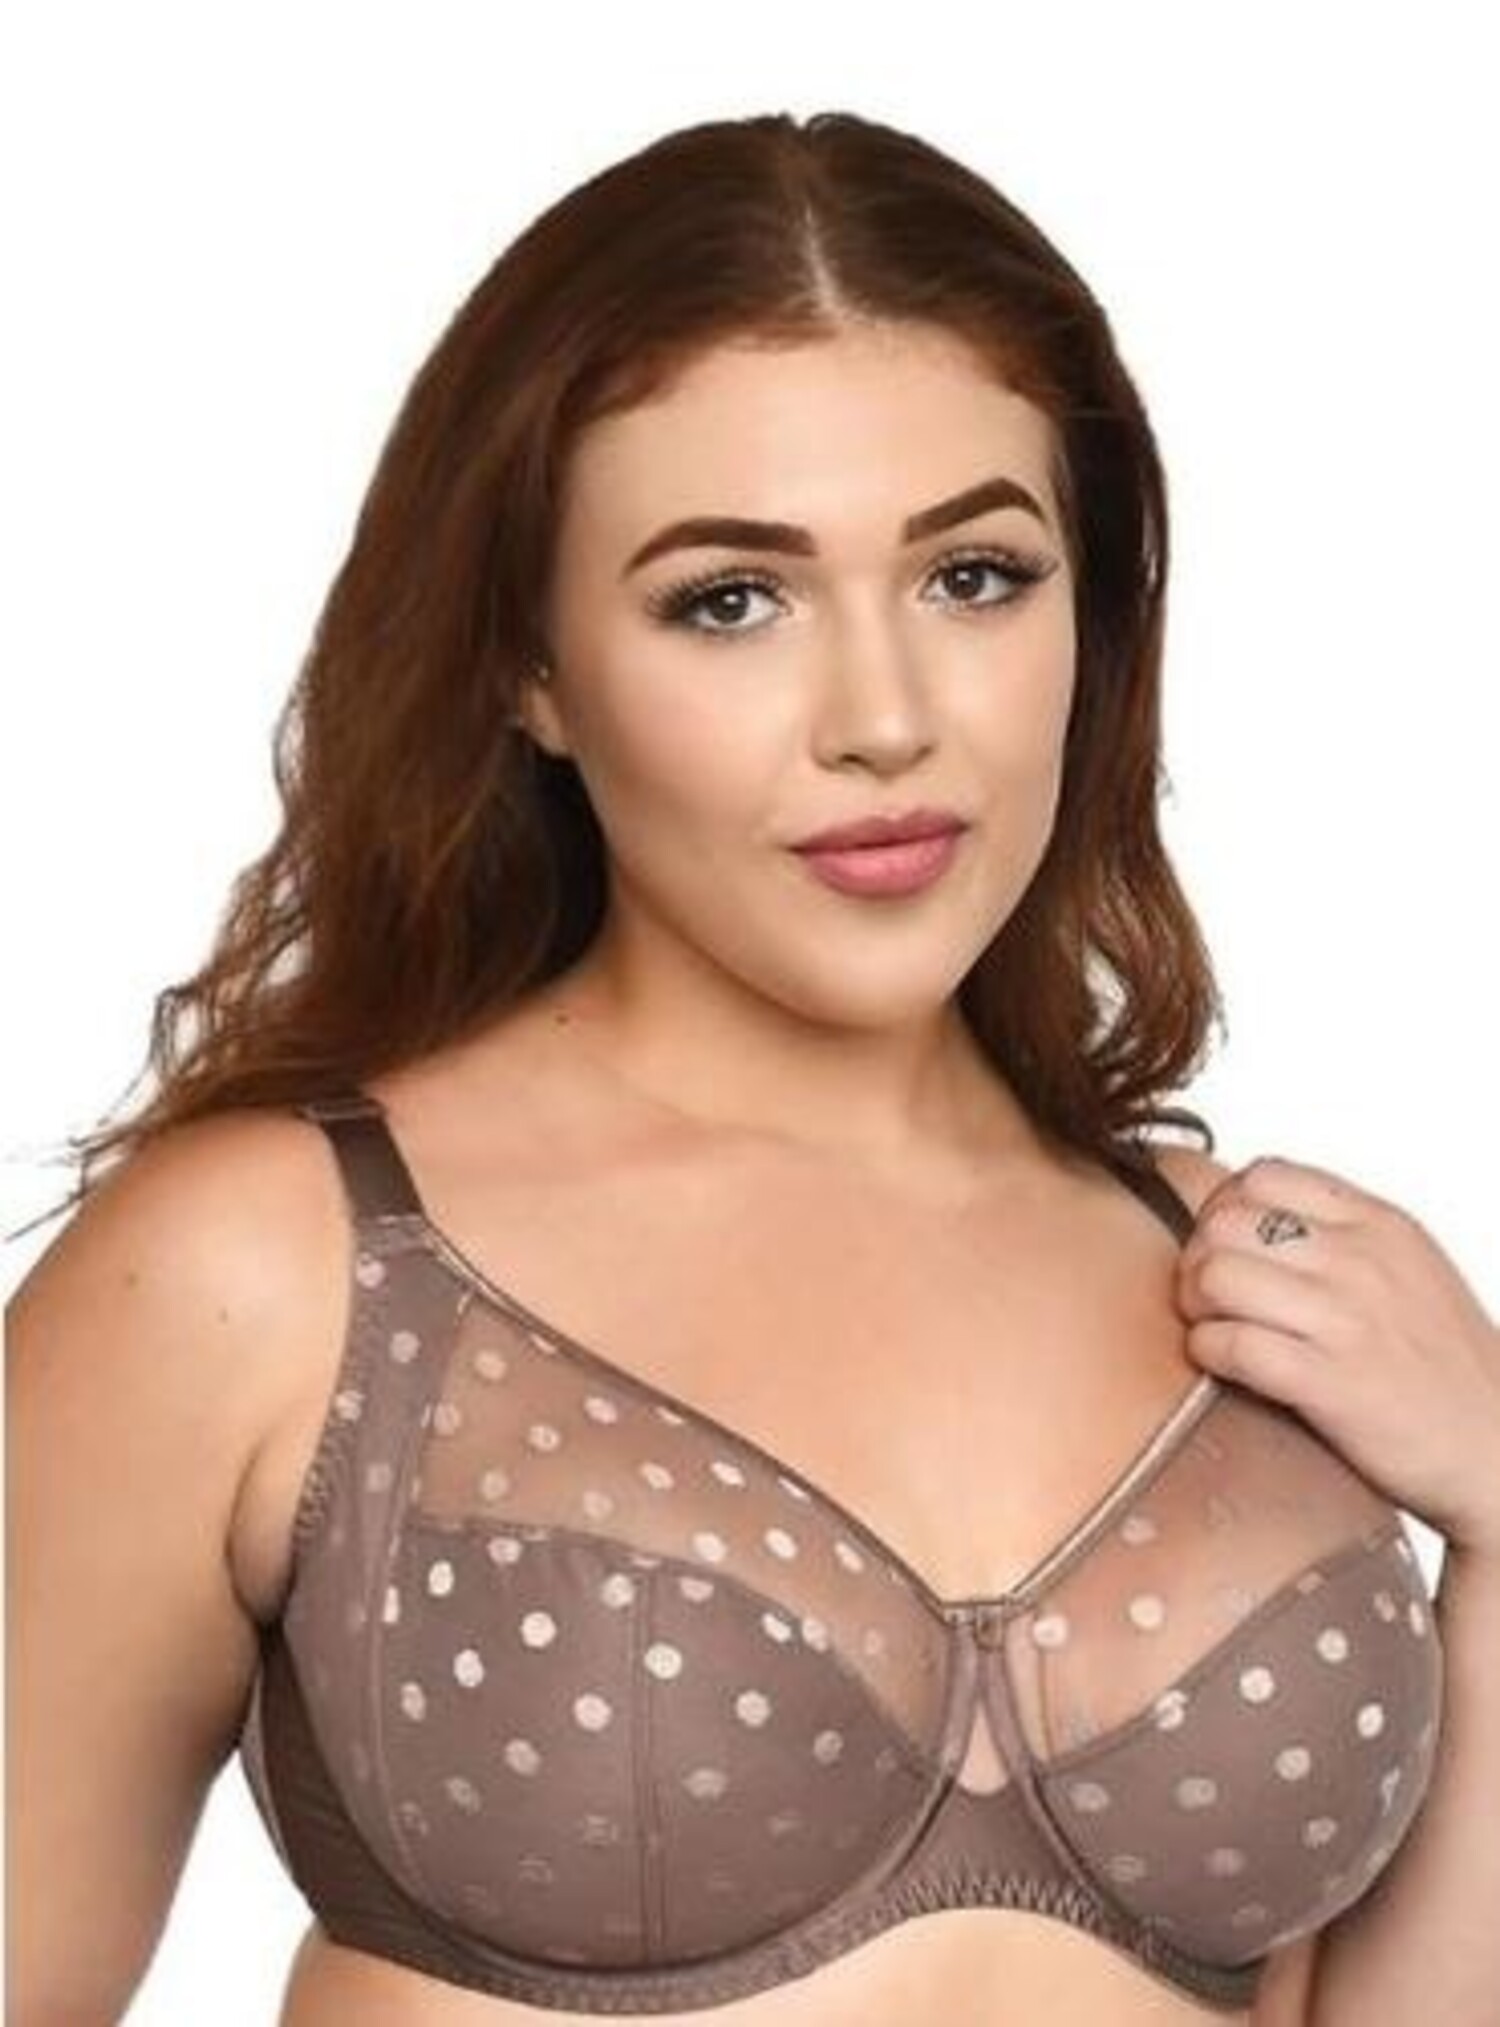 Fit Fully Yours Lingerie